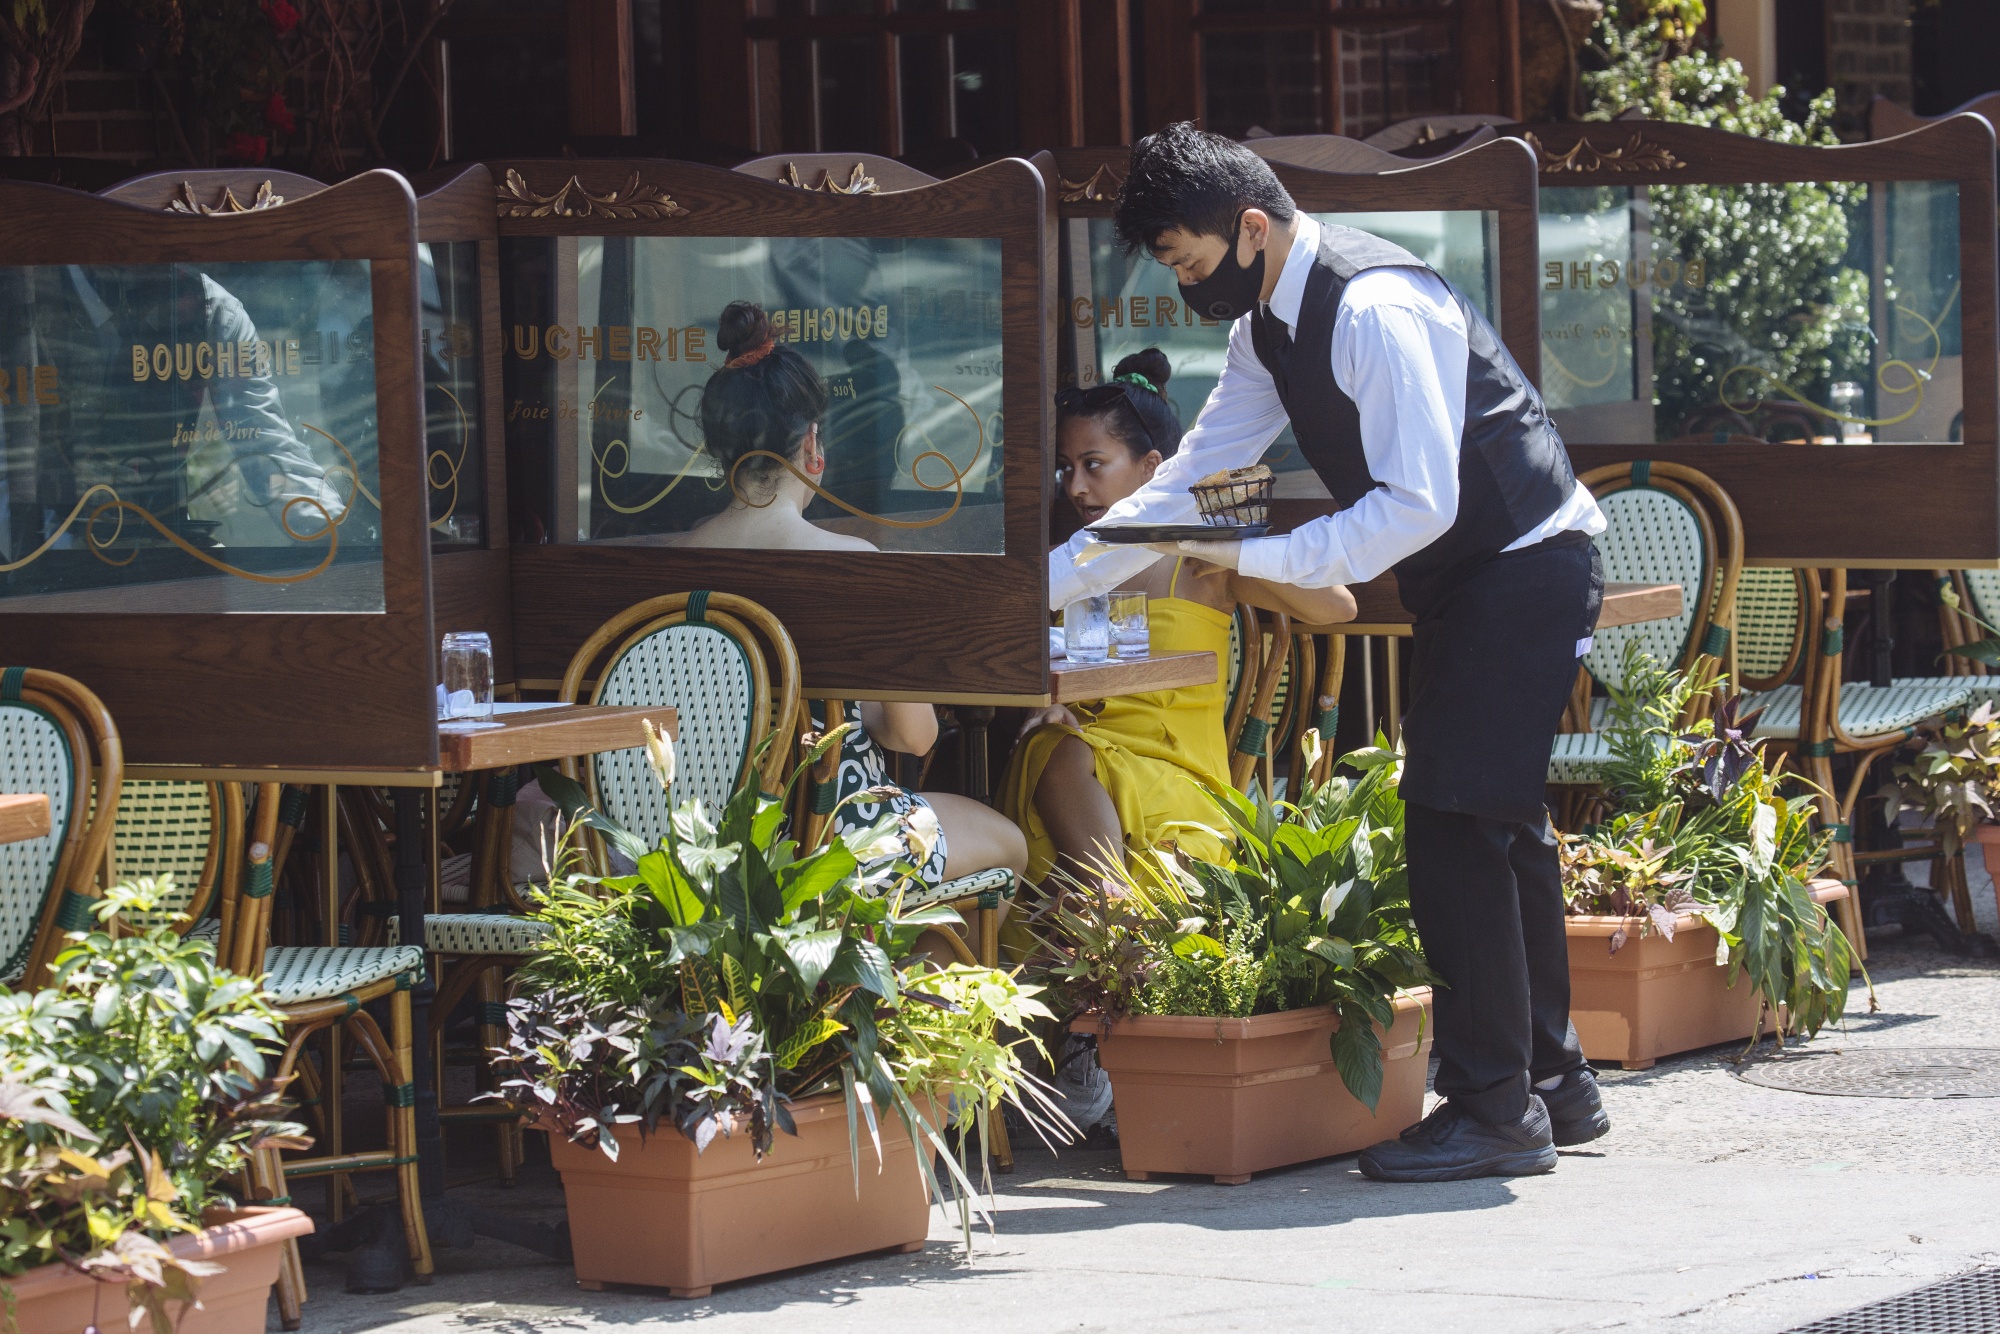 A server assists customers dining outside at a restaurant in the Greenwich Village neighborhood of New York on&nbsp;July 6.&nbsp;